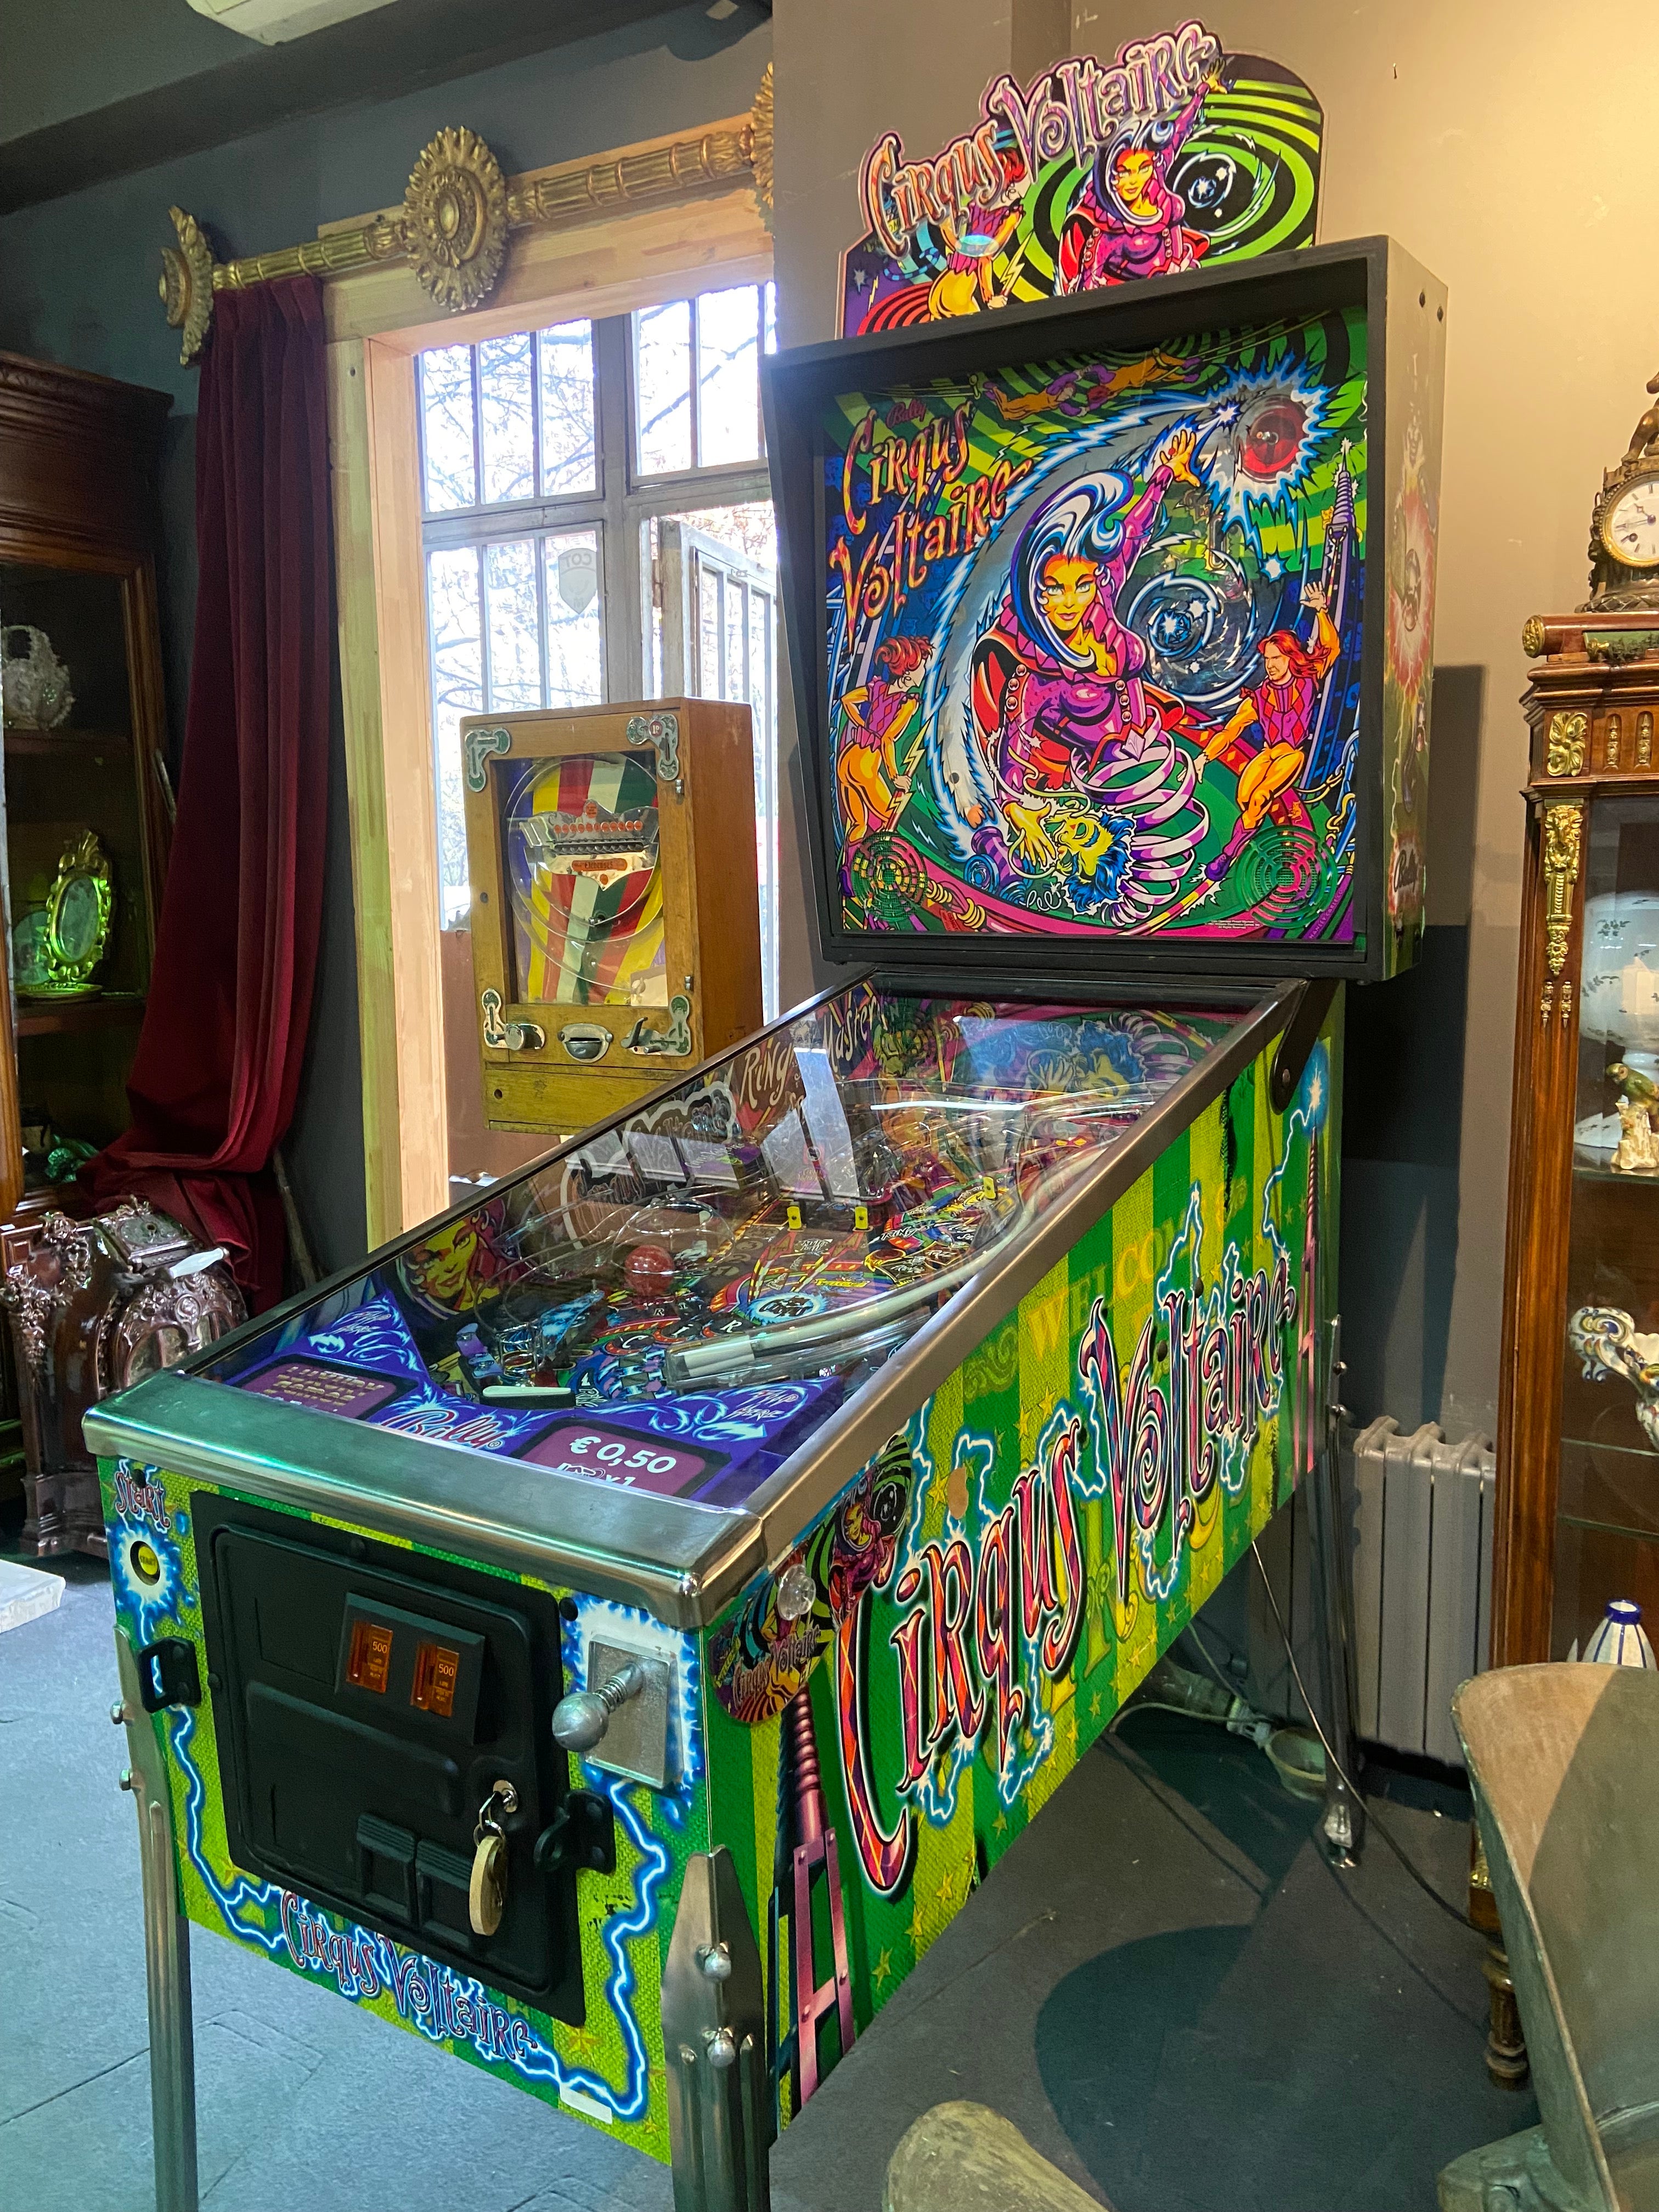 Cirqus Voltaire is a 1997 pinball game, designed by John Popadiuk and Cameron Silver and was released by Williams Electronics Games. The theme involves the player performing many different marvels in order to join the circus. Some of the game's